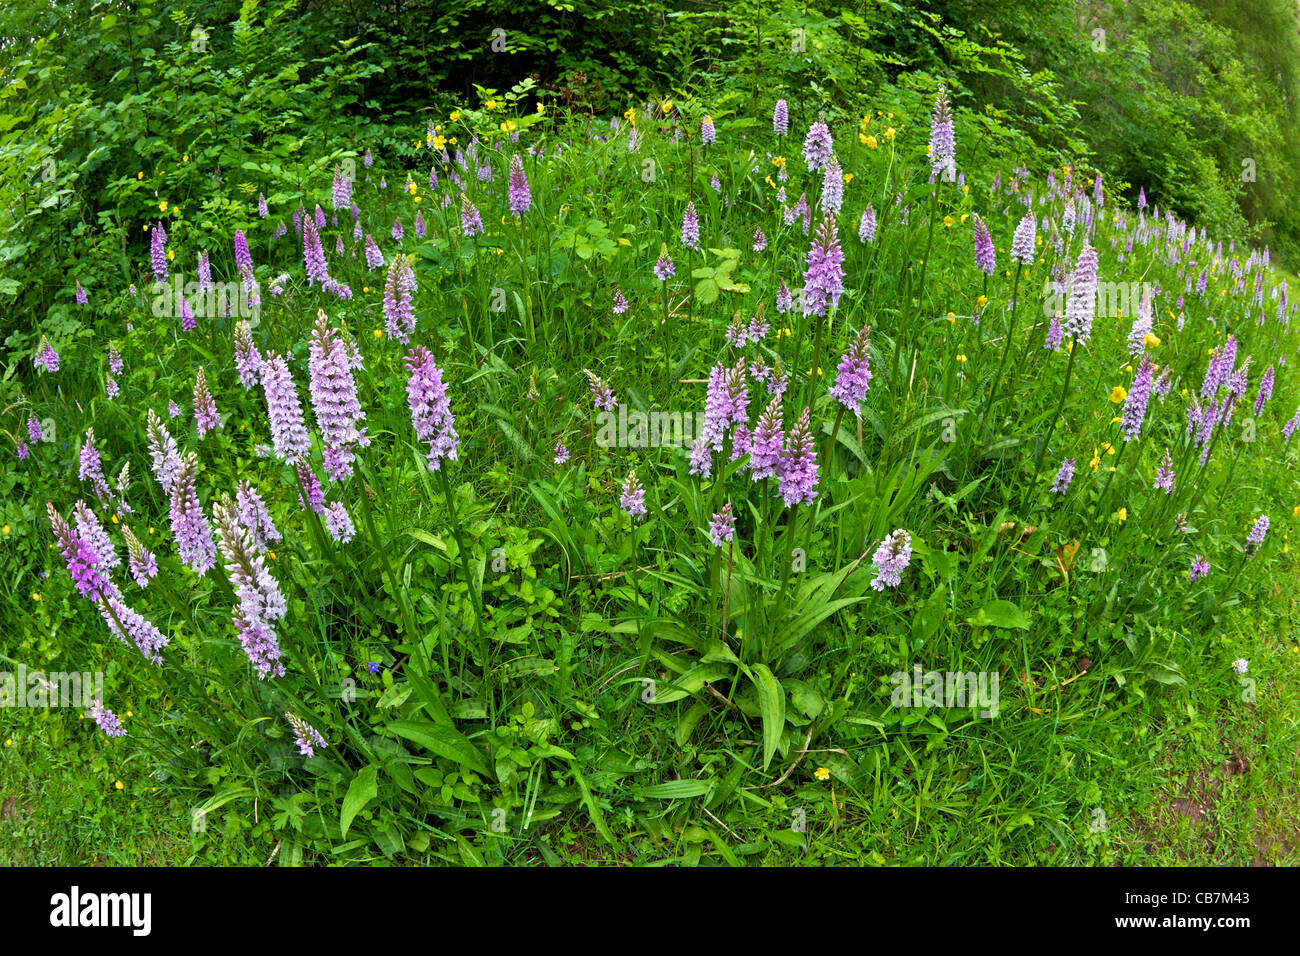 Common Spotted Orchid, Dactylorhiza fuchsii, in Llanymynech Nature Reserve near Oswestry in June, Shropshire, England, UK, Unite Stock Photo